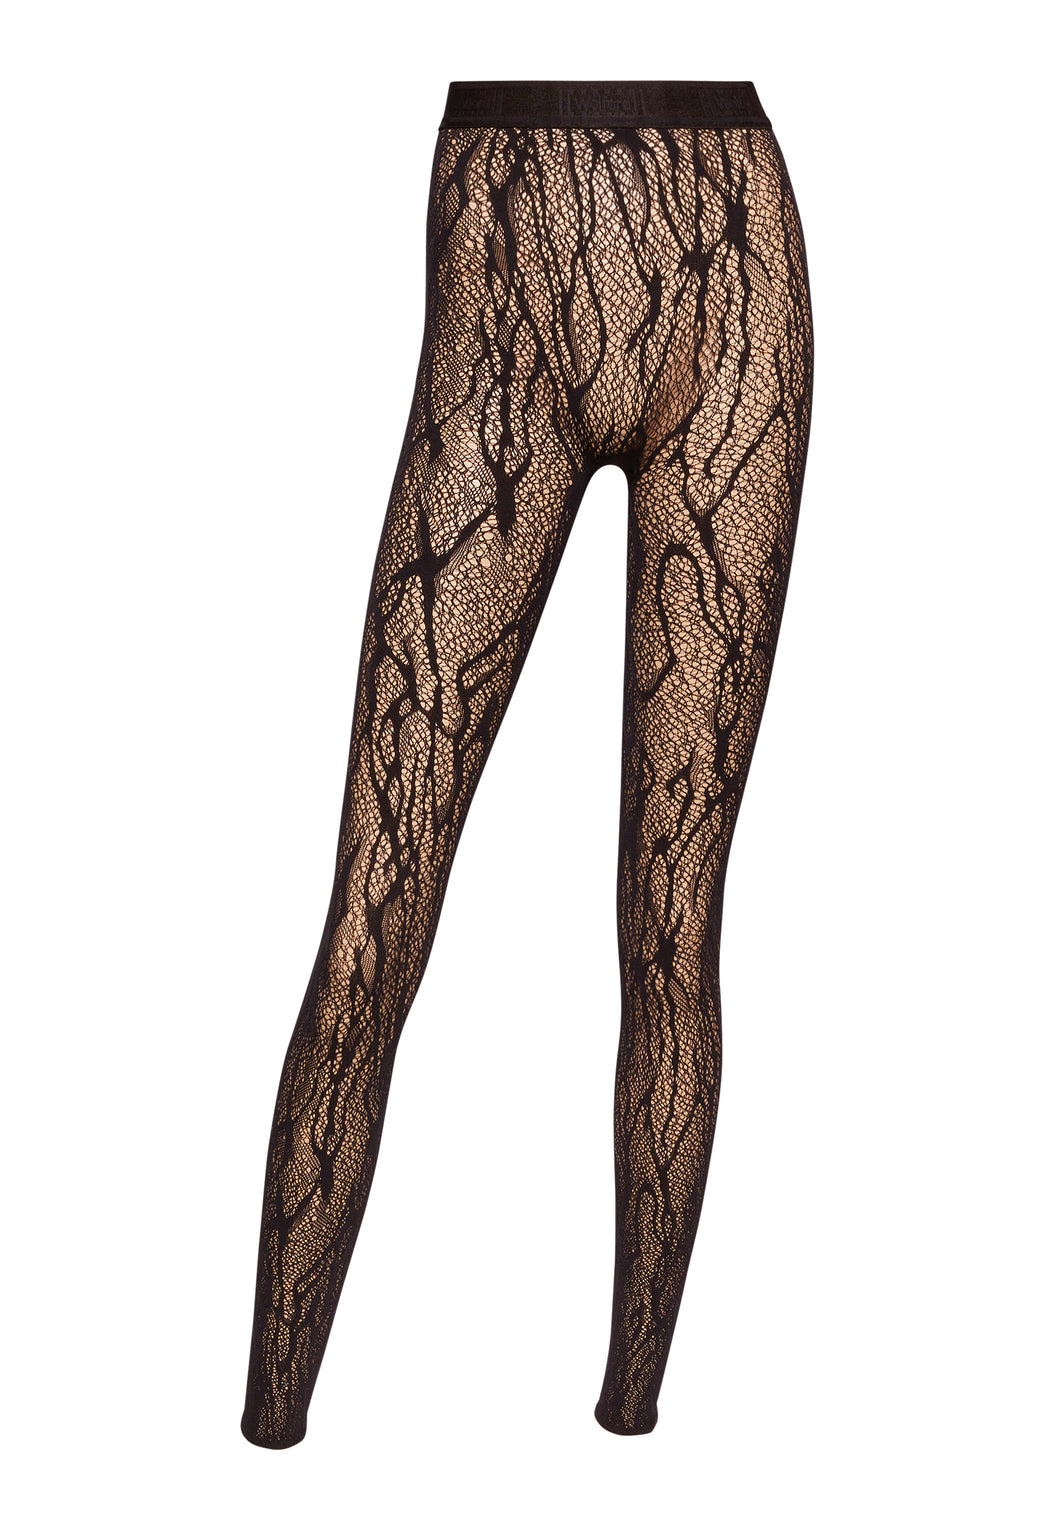 Snake Lace Tights Leggings